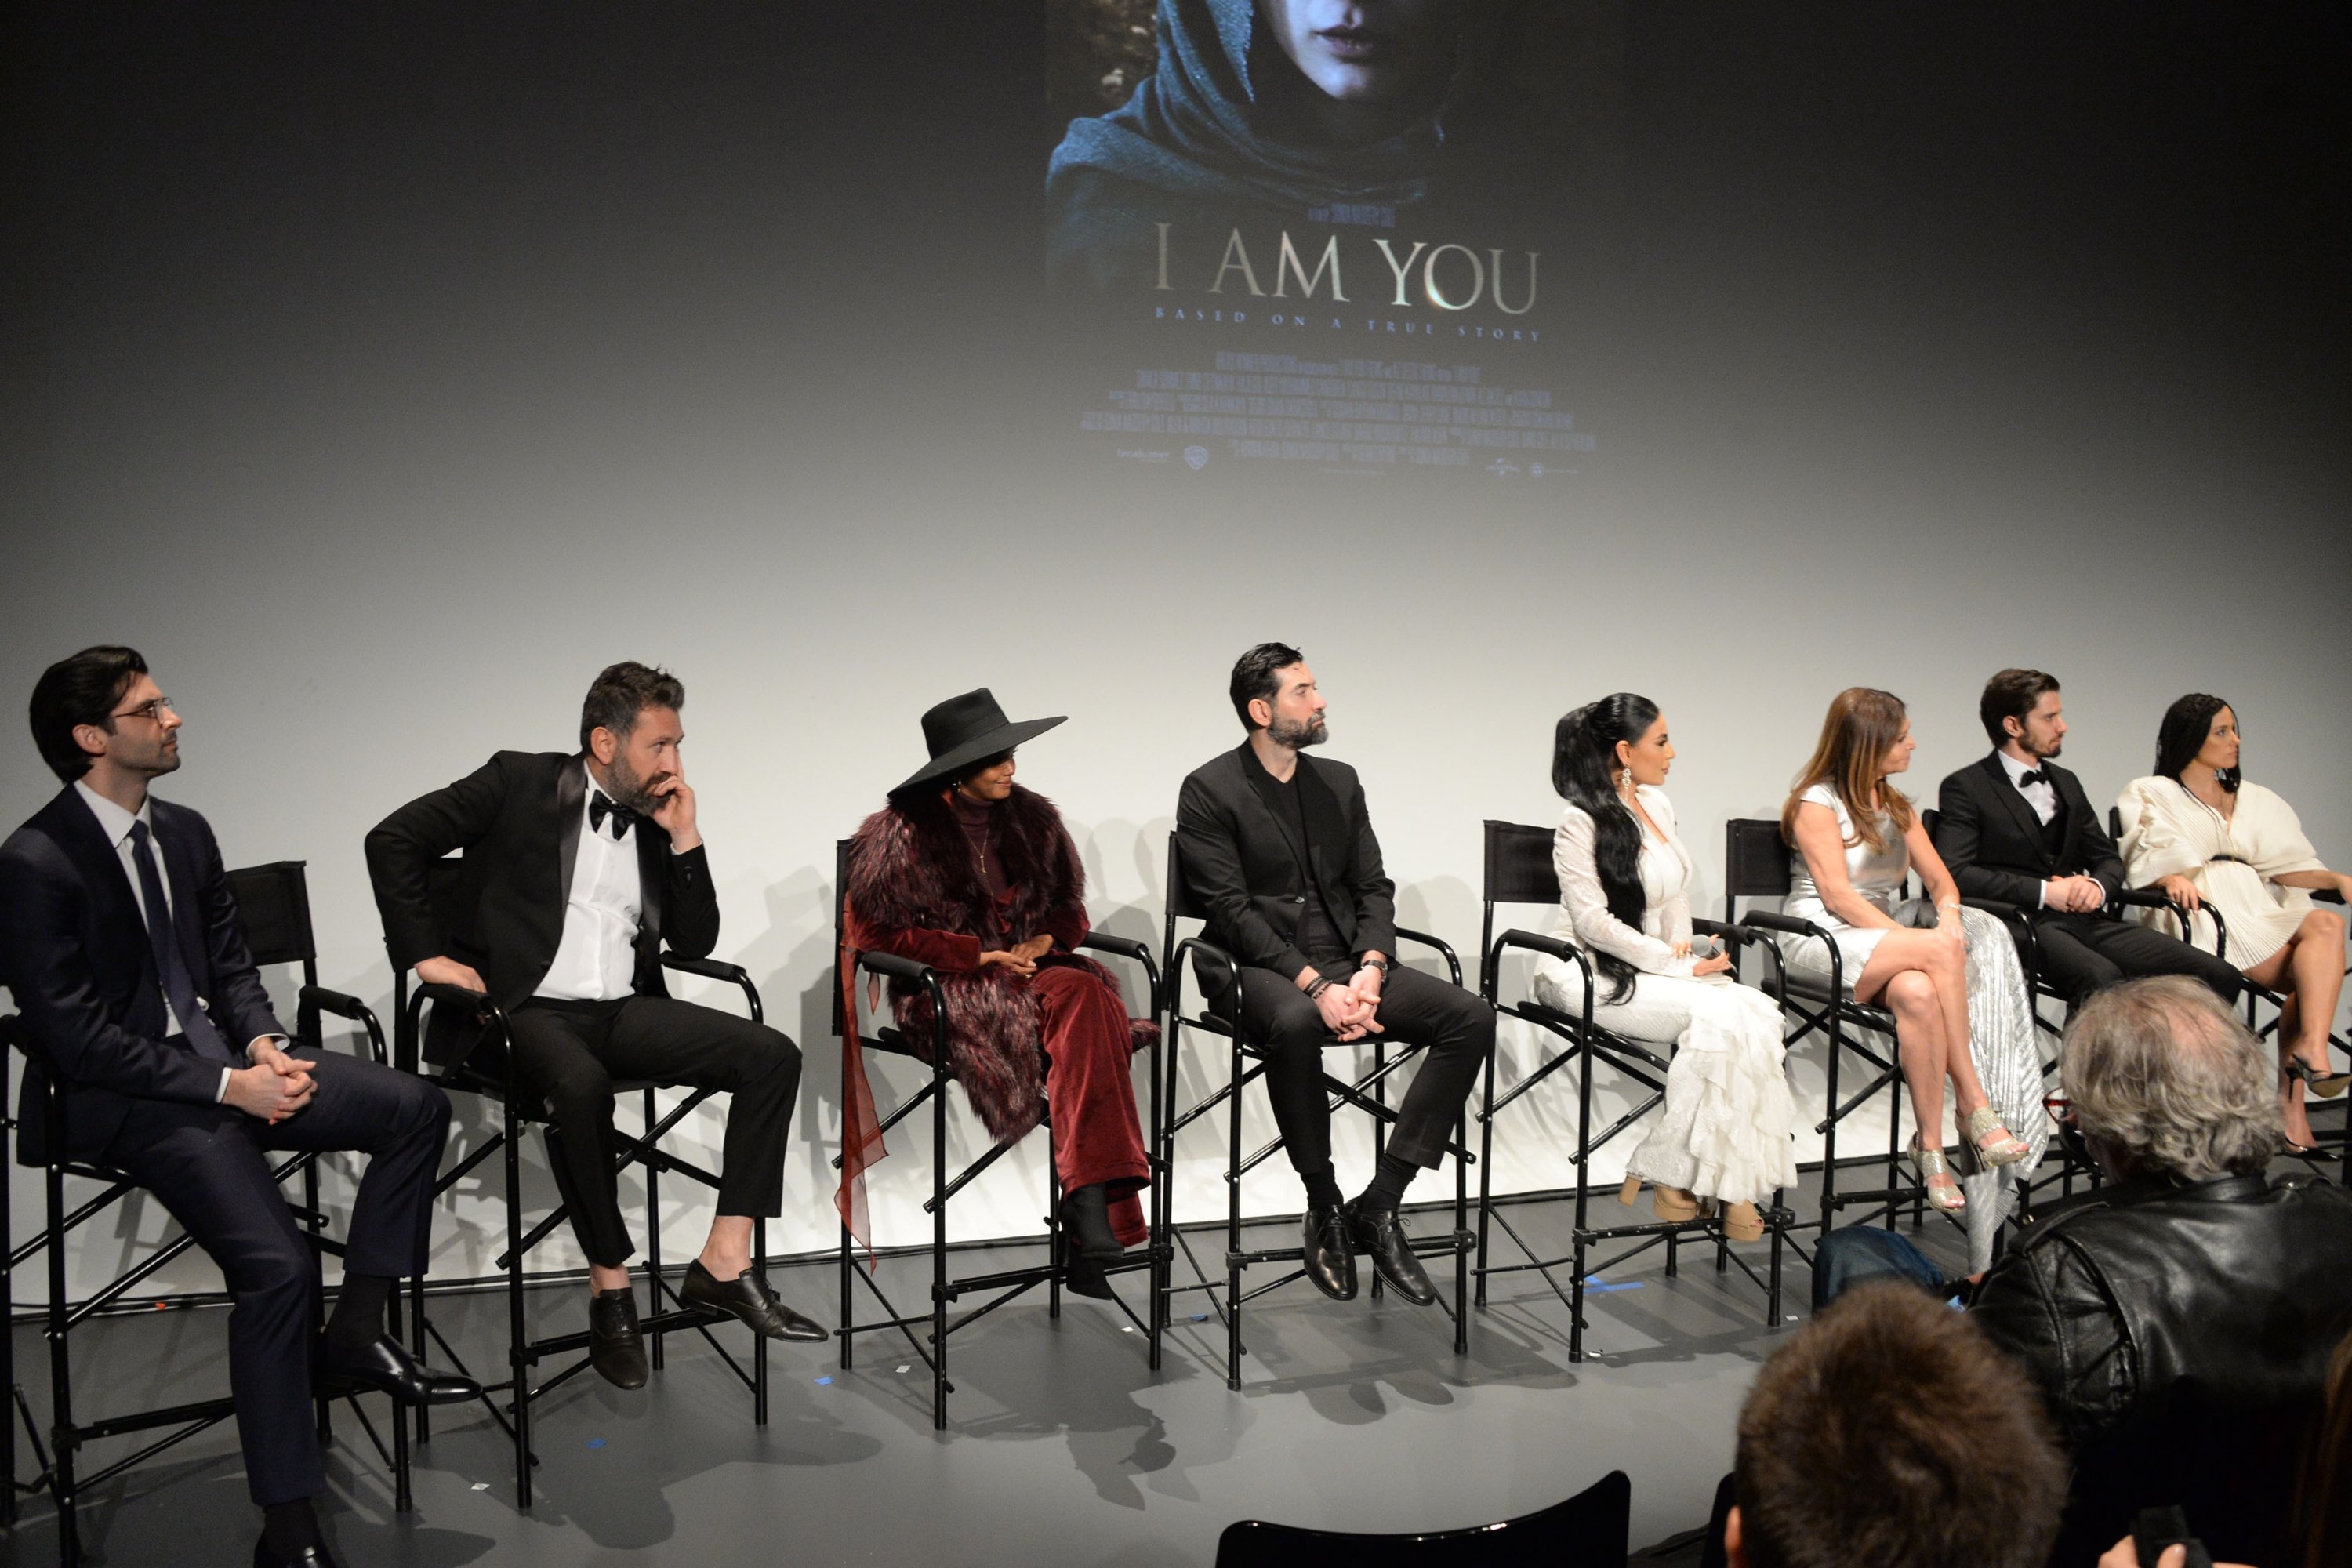 From left, Chris Cole, Hakan Aydın, Halima Aden, Ali Pınar, Aryana Sayeed, Sonia Nassery Cole, Emre Çetinkaya and Cansu Tosun onstage at the New York premiere of "I Am You," at Pier 59 Studios, New York City, U.S., Feb. 6, 2020. (Getty Images)